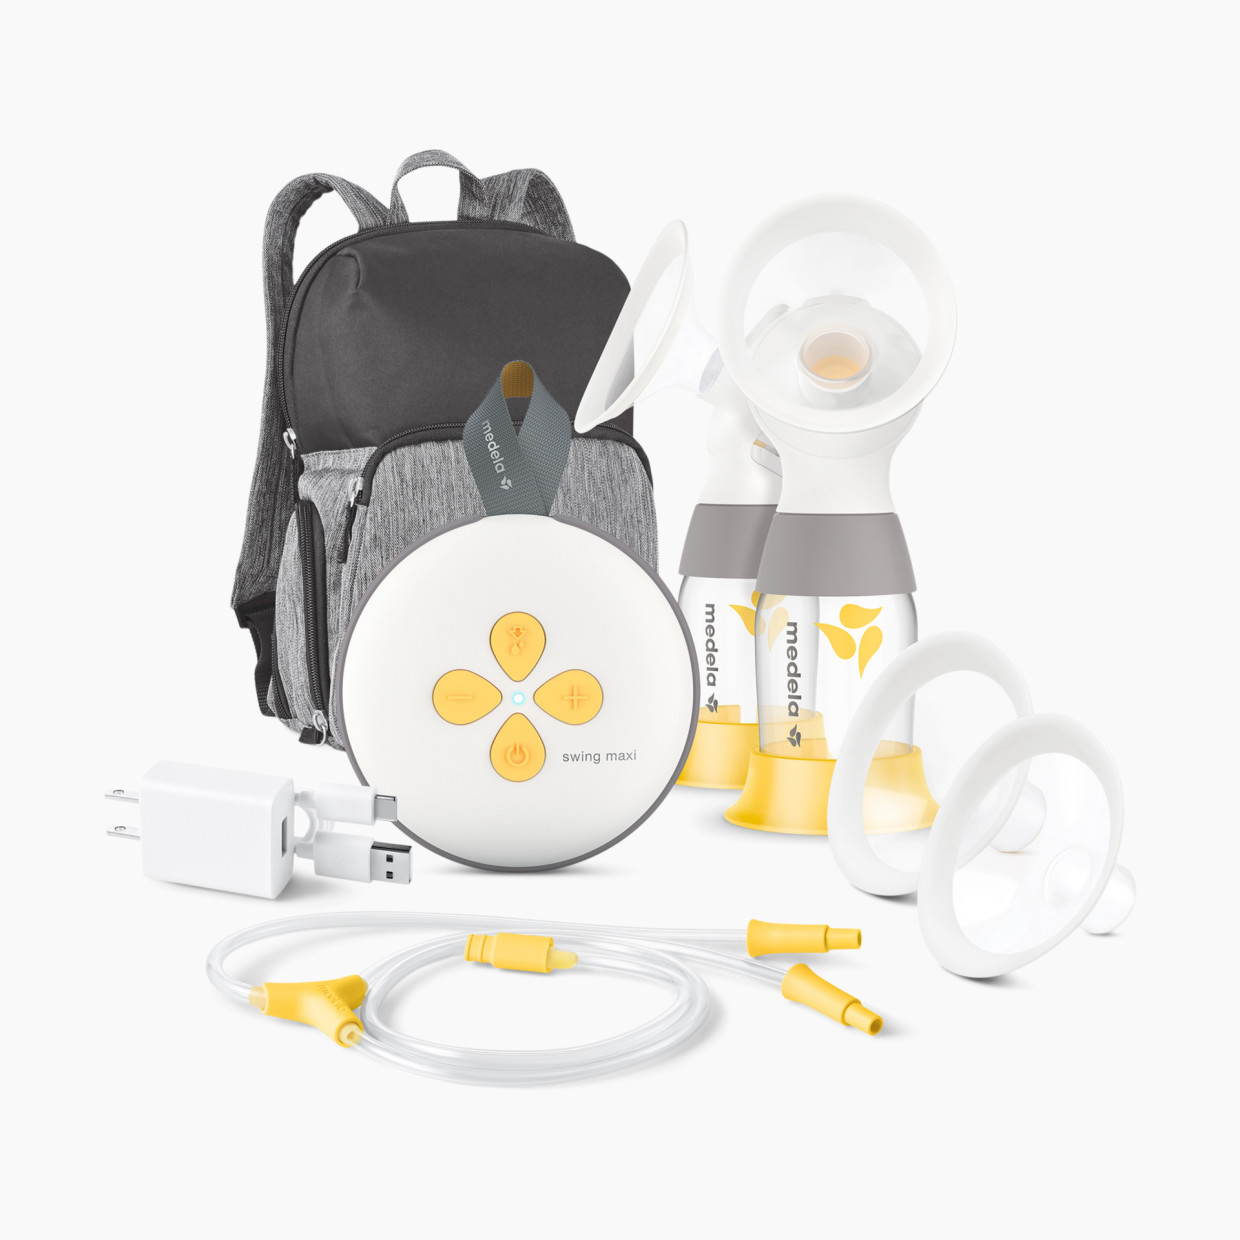 Medela- Great Gift of Breastfeeding Supplies for New Mom: Accessory Starter  Set